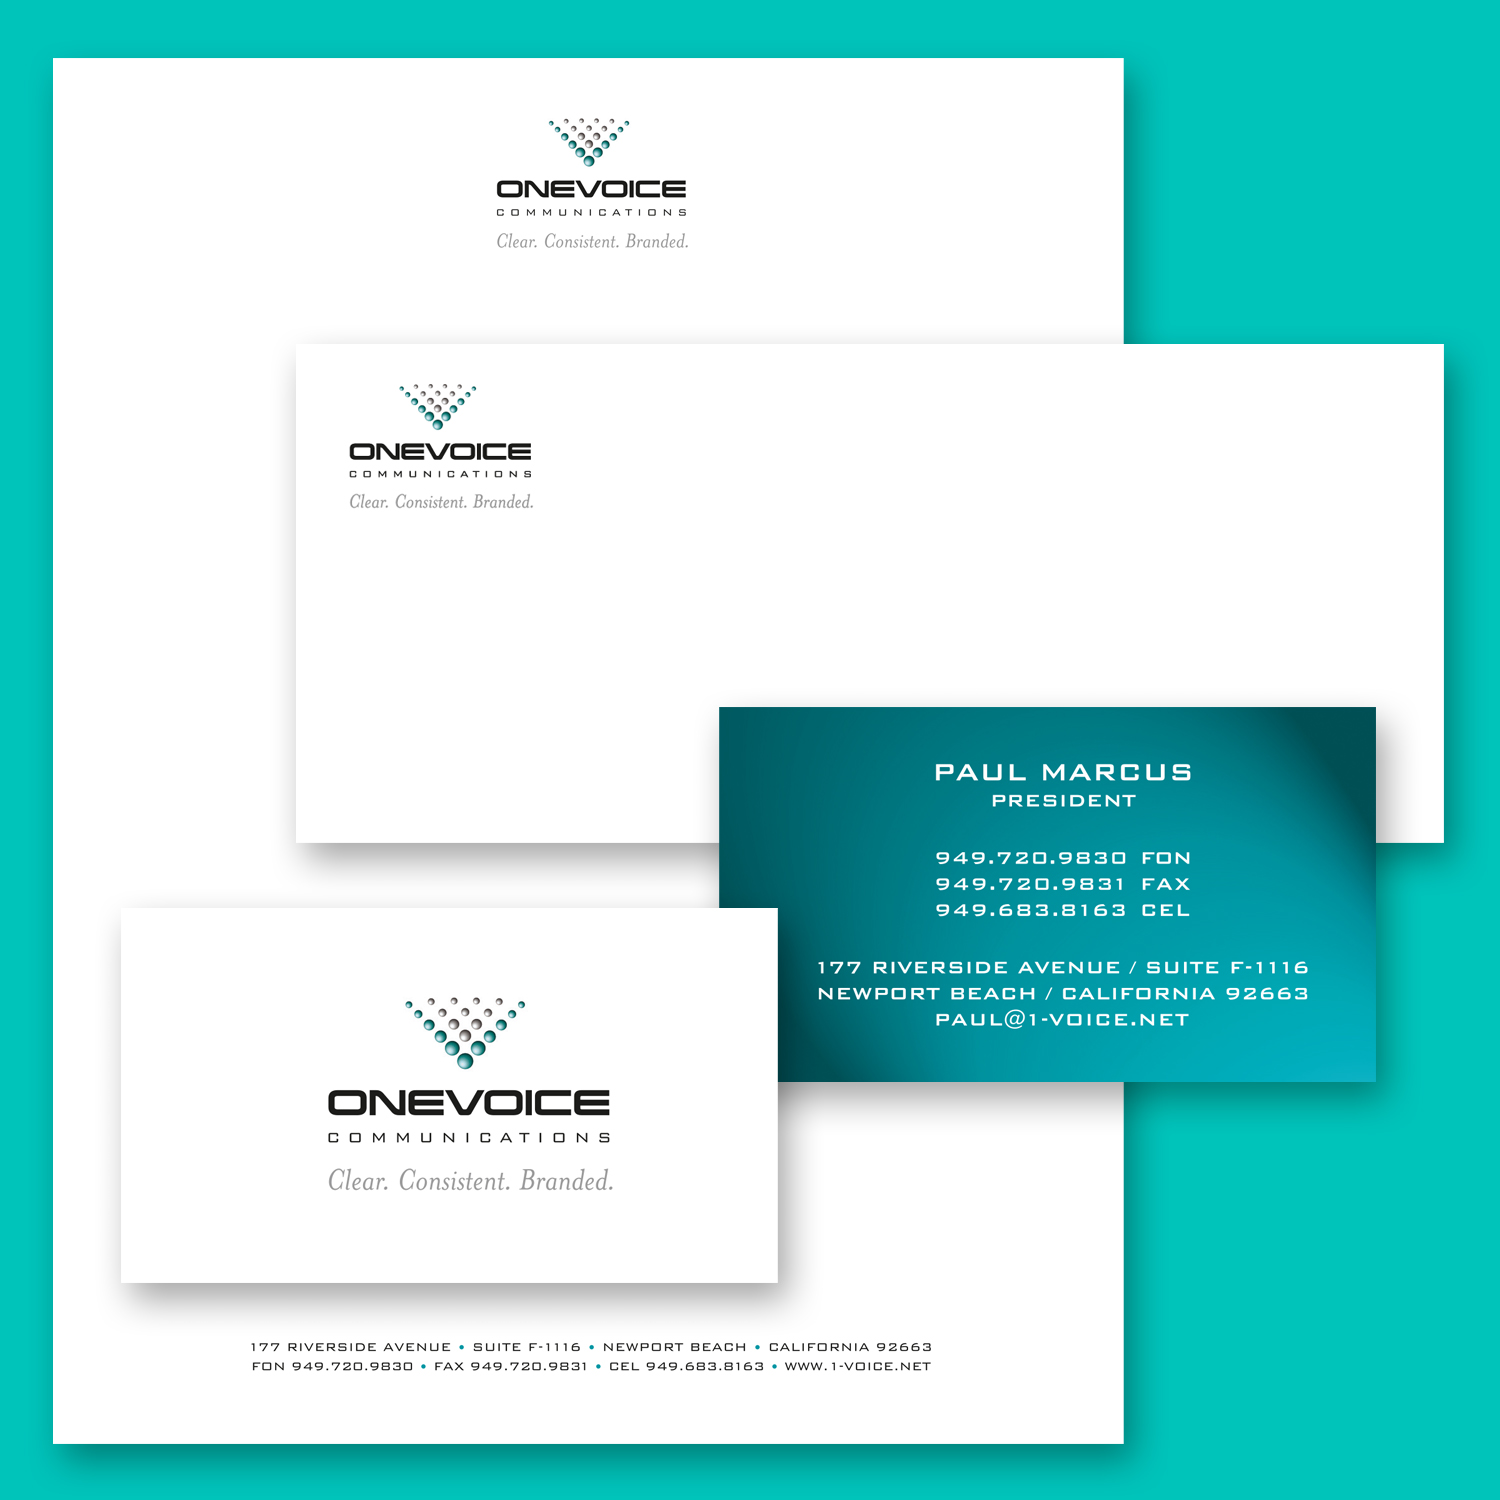 One Voice Communications Stationery